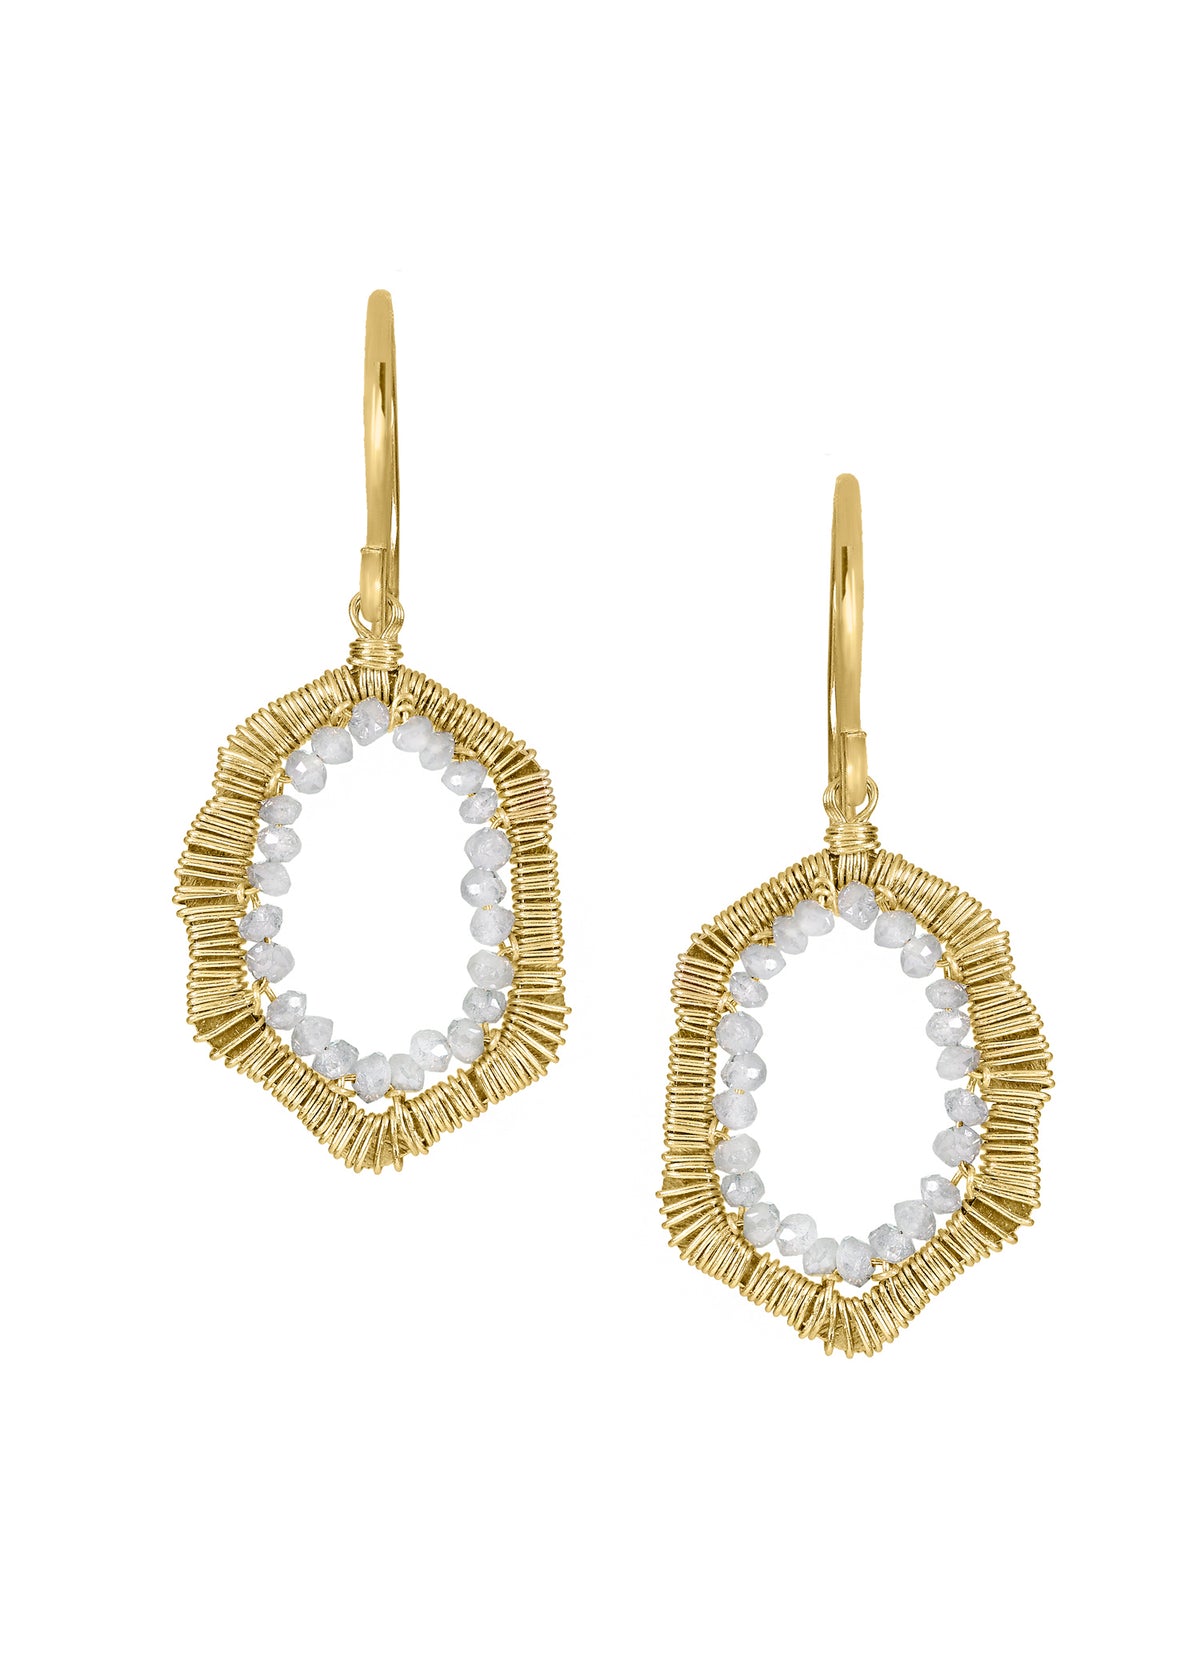 Gray diamonds 14k gold Earrings measure 1-5/8&quot; in length (including the ear wires) and 7/8&quot; in width at the widest point Handmade in our Los Angeles studio